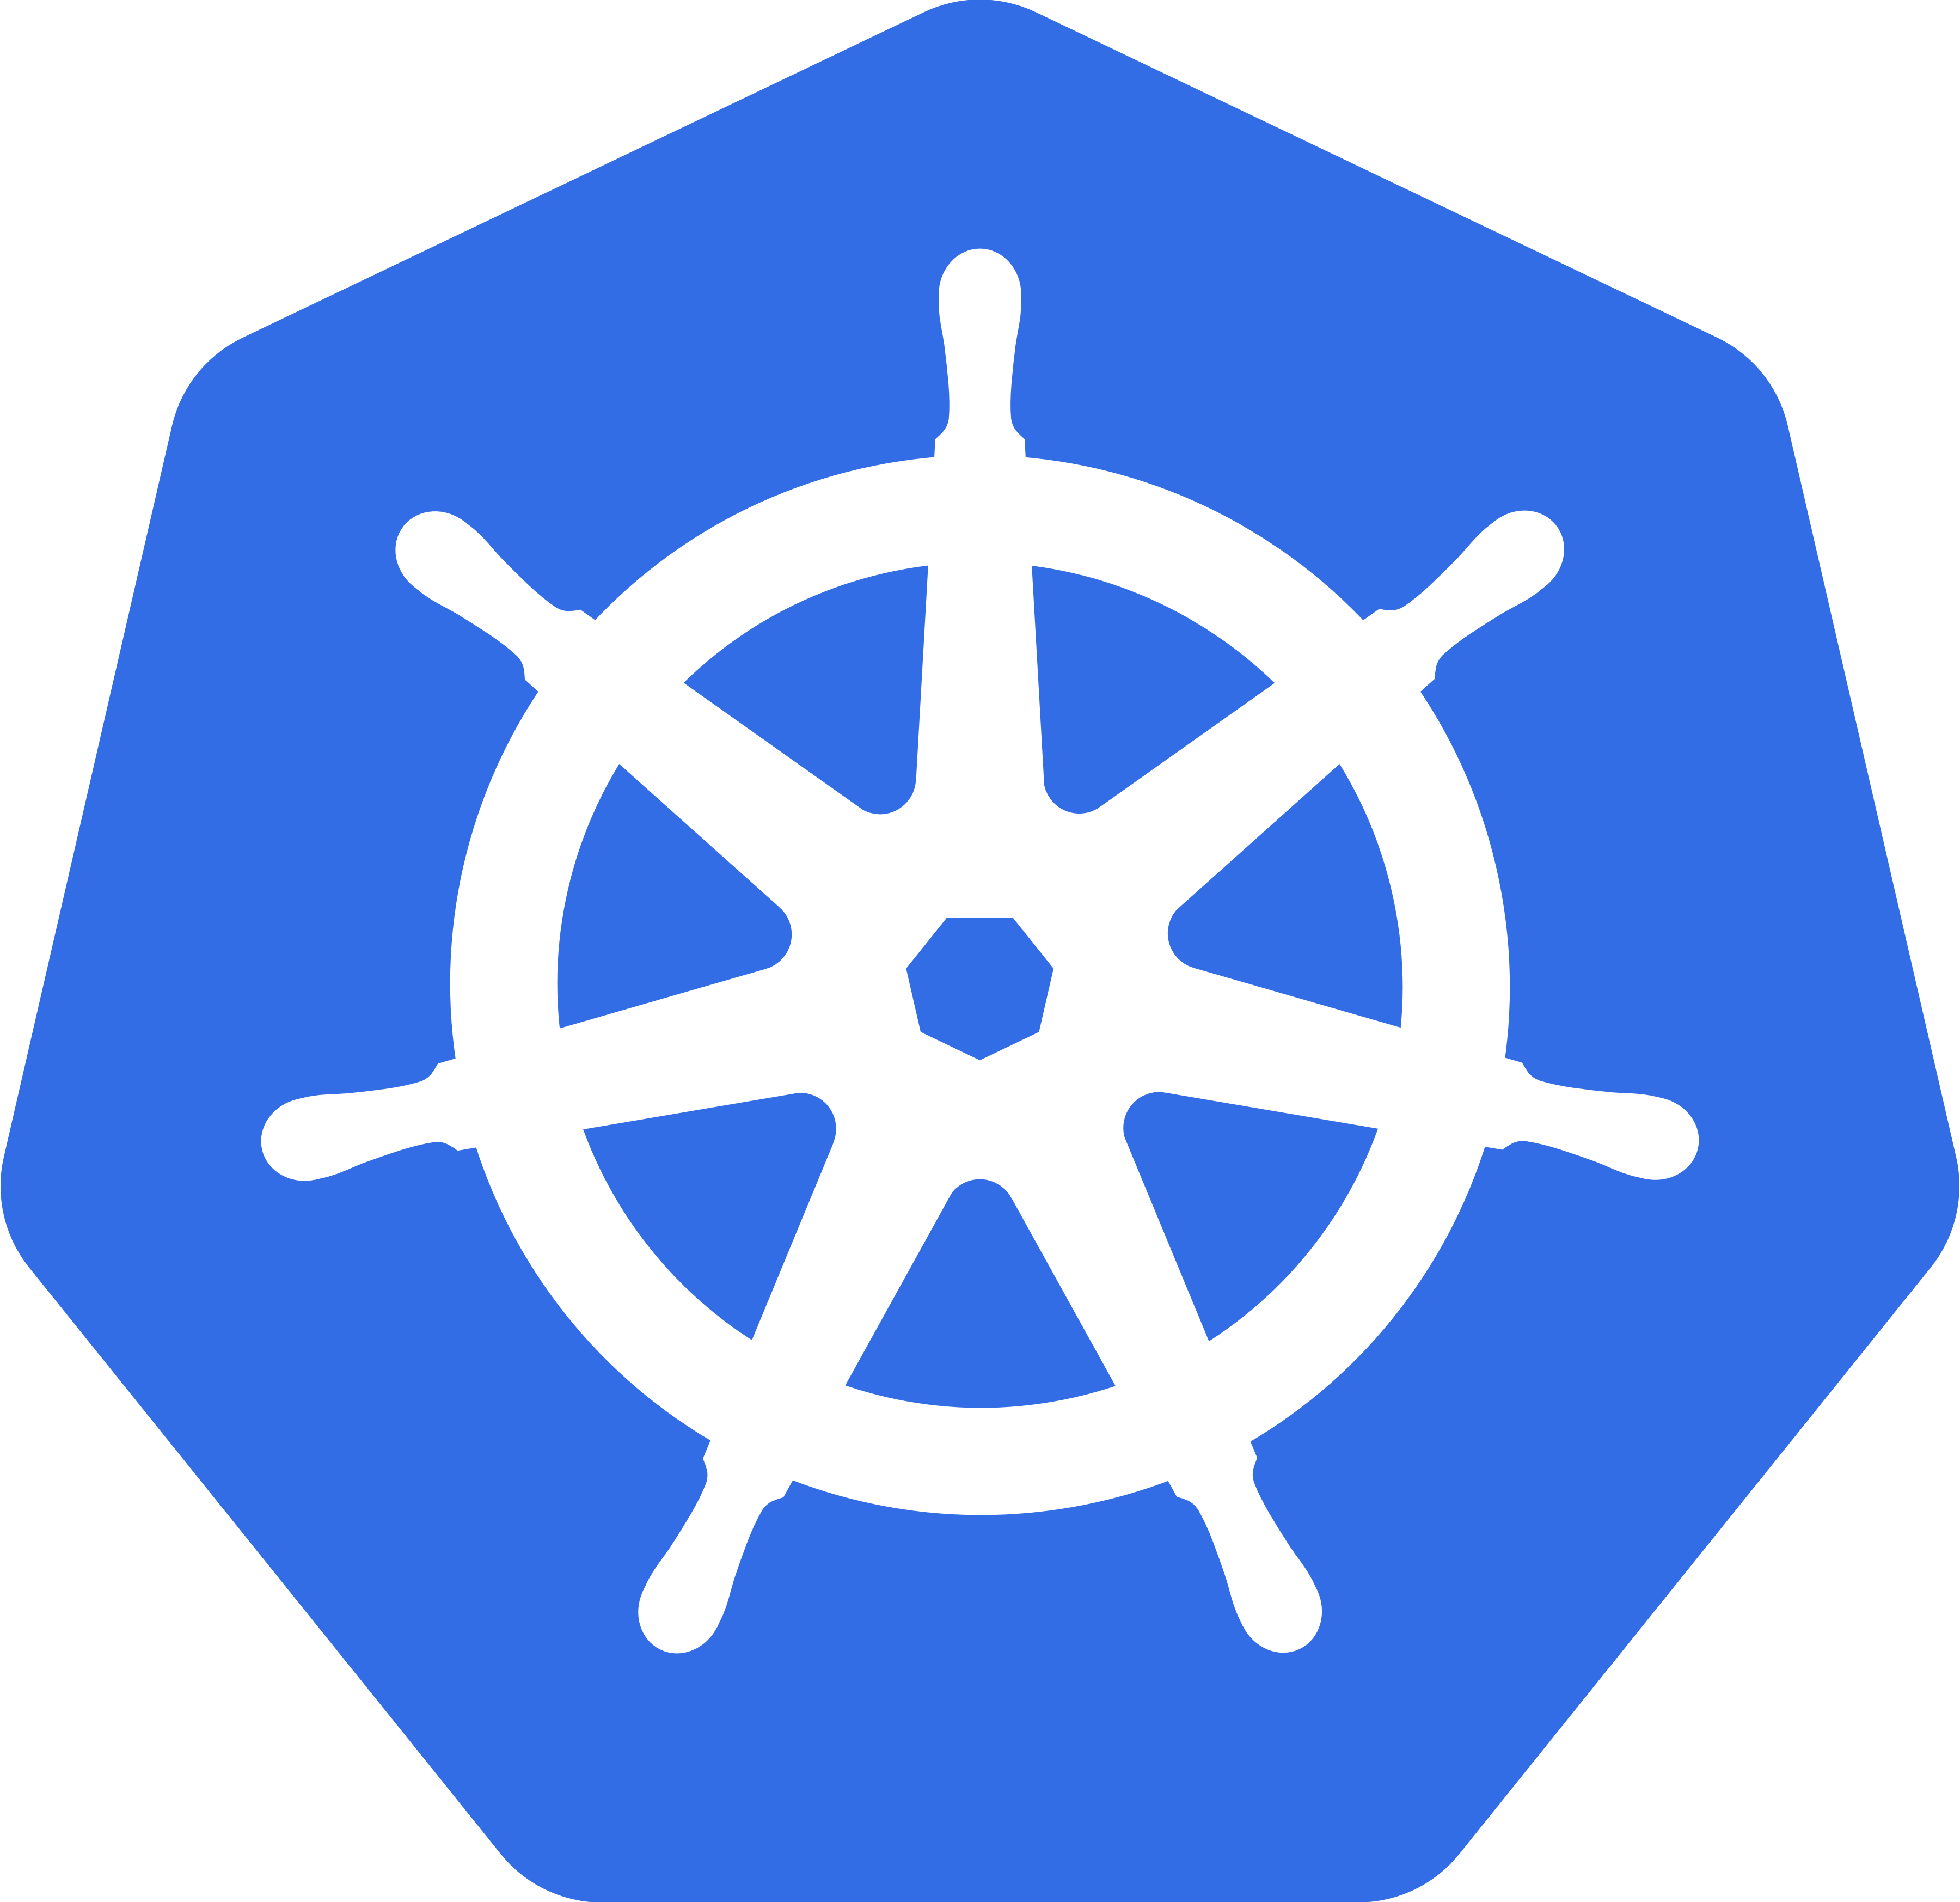 Collect Logs on Kubernetes cluster